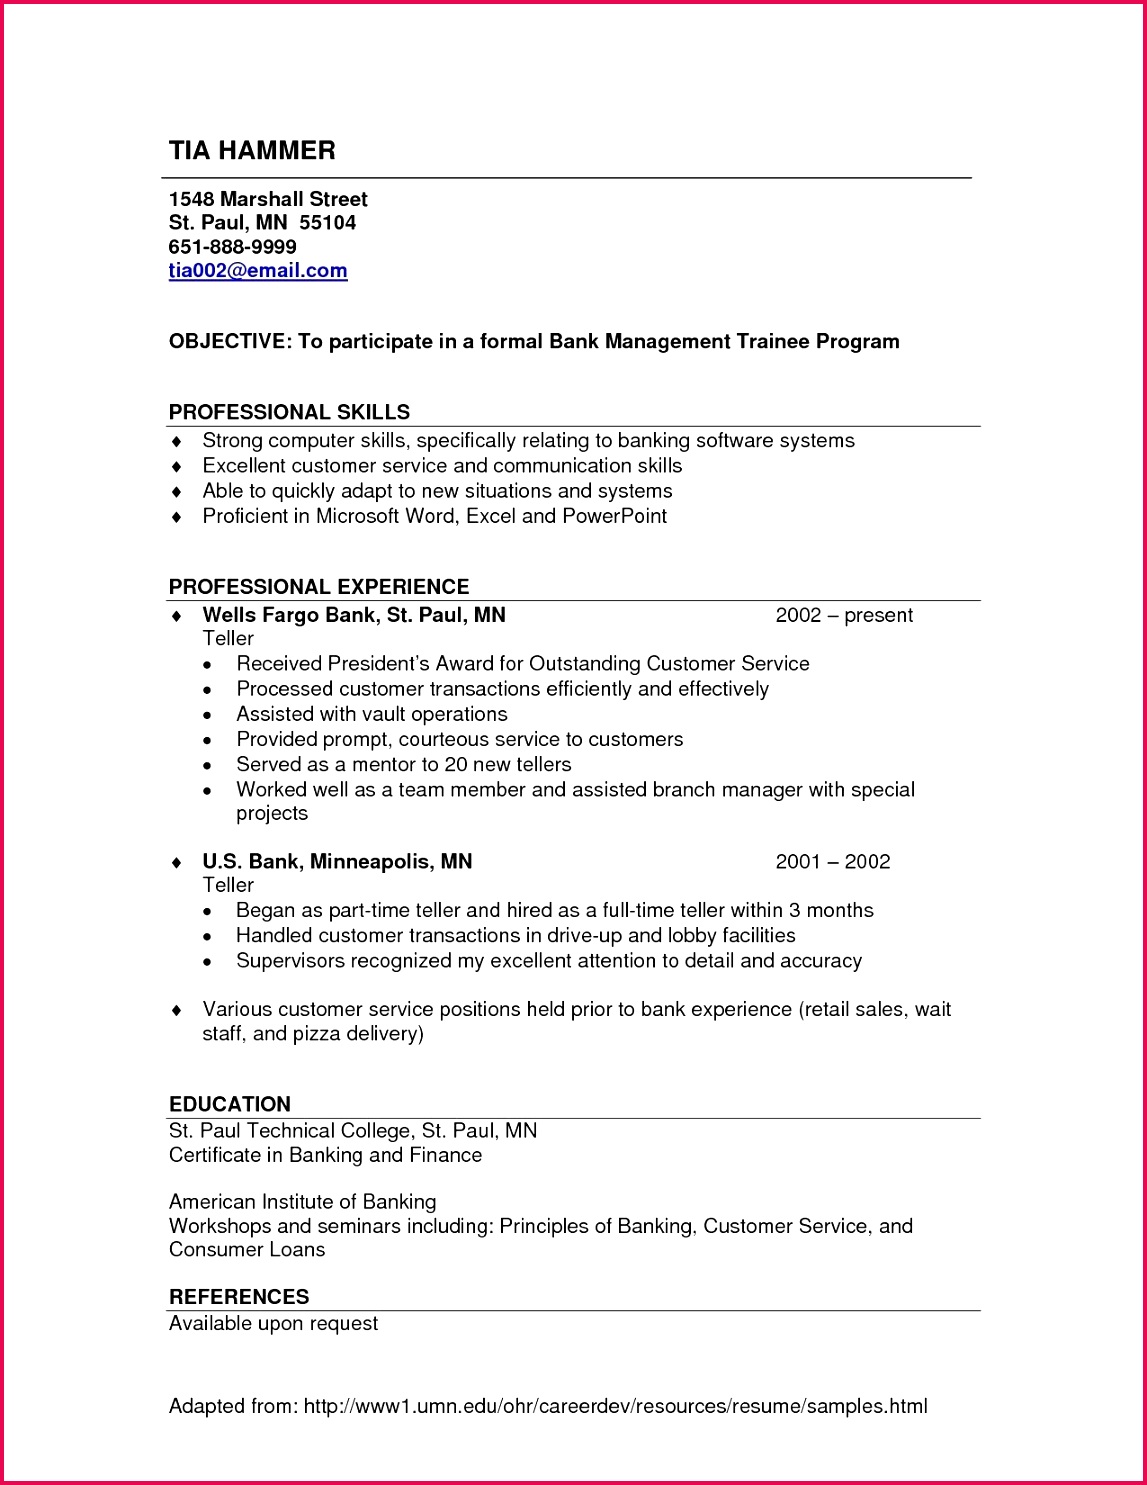 certificate of participation template awesome template resume examples resum sample fresh c2a2e280a0 0d resume samples of certificate of participation template